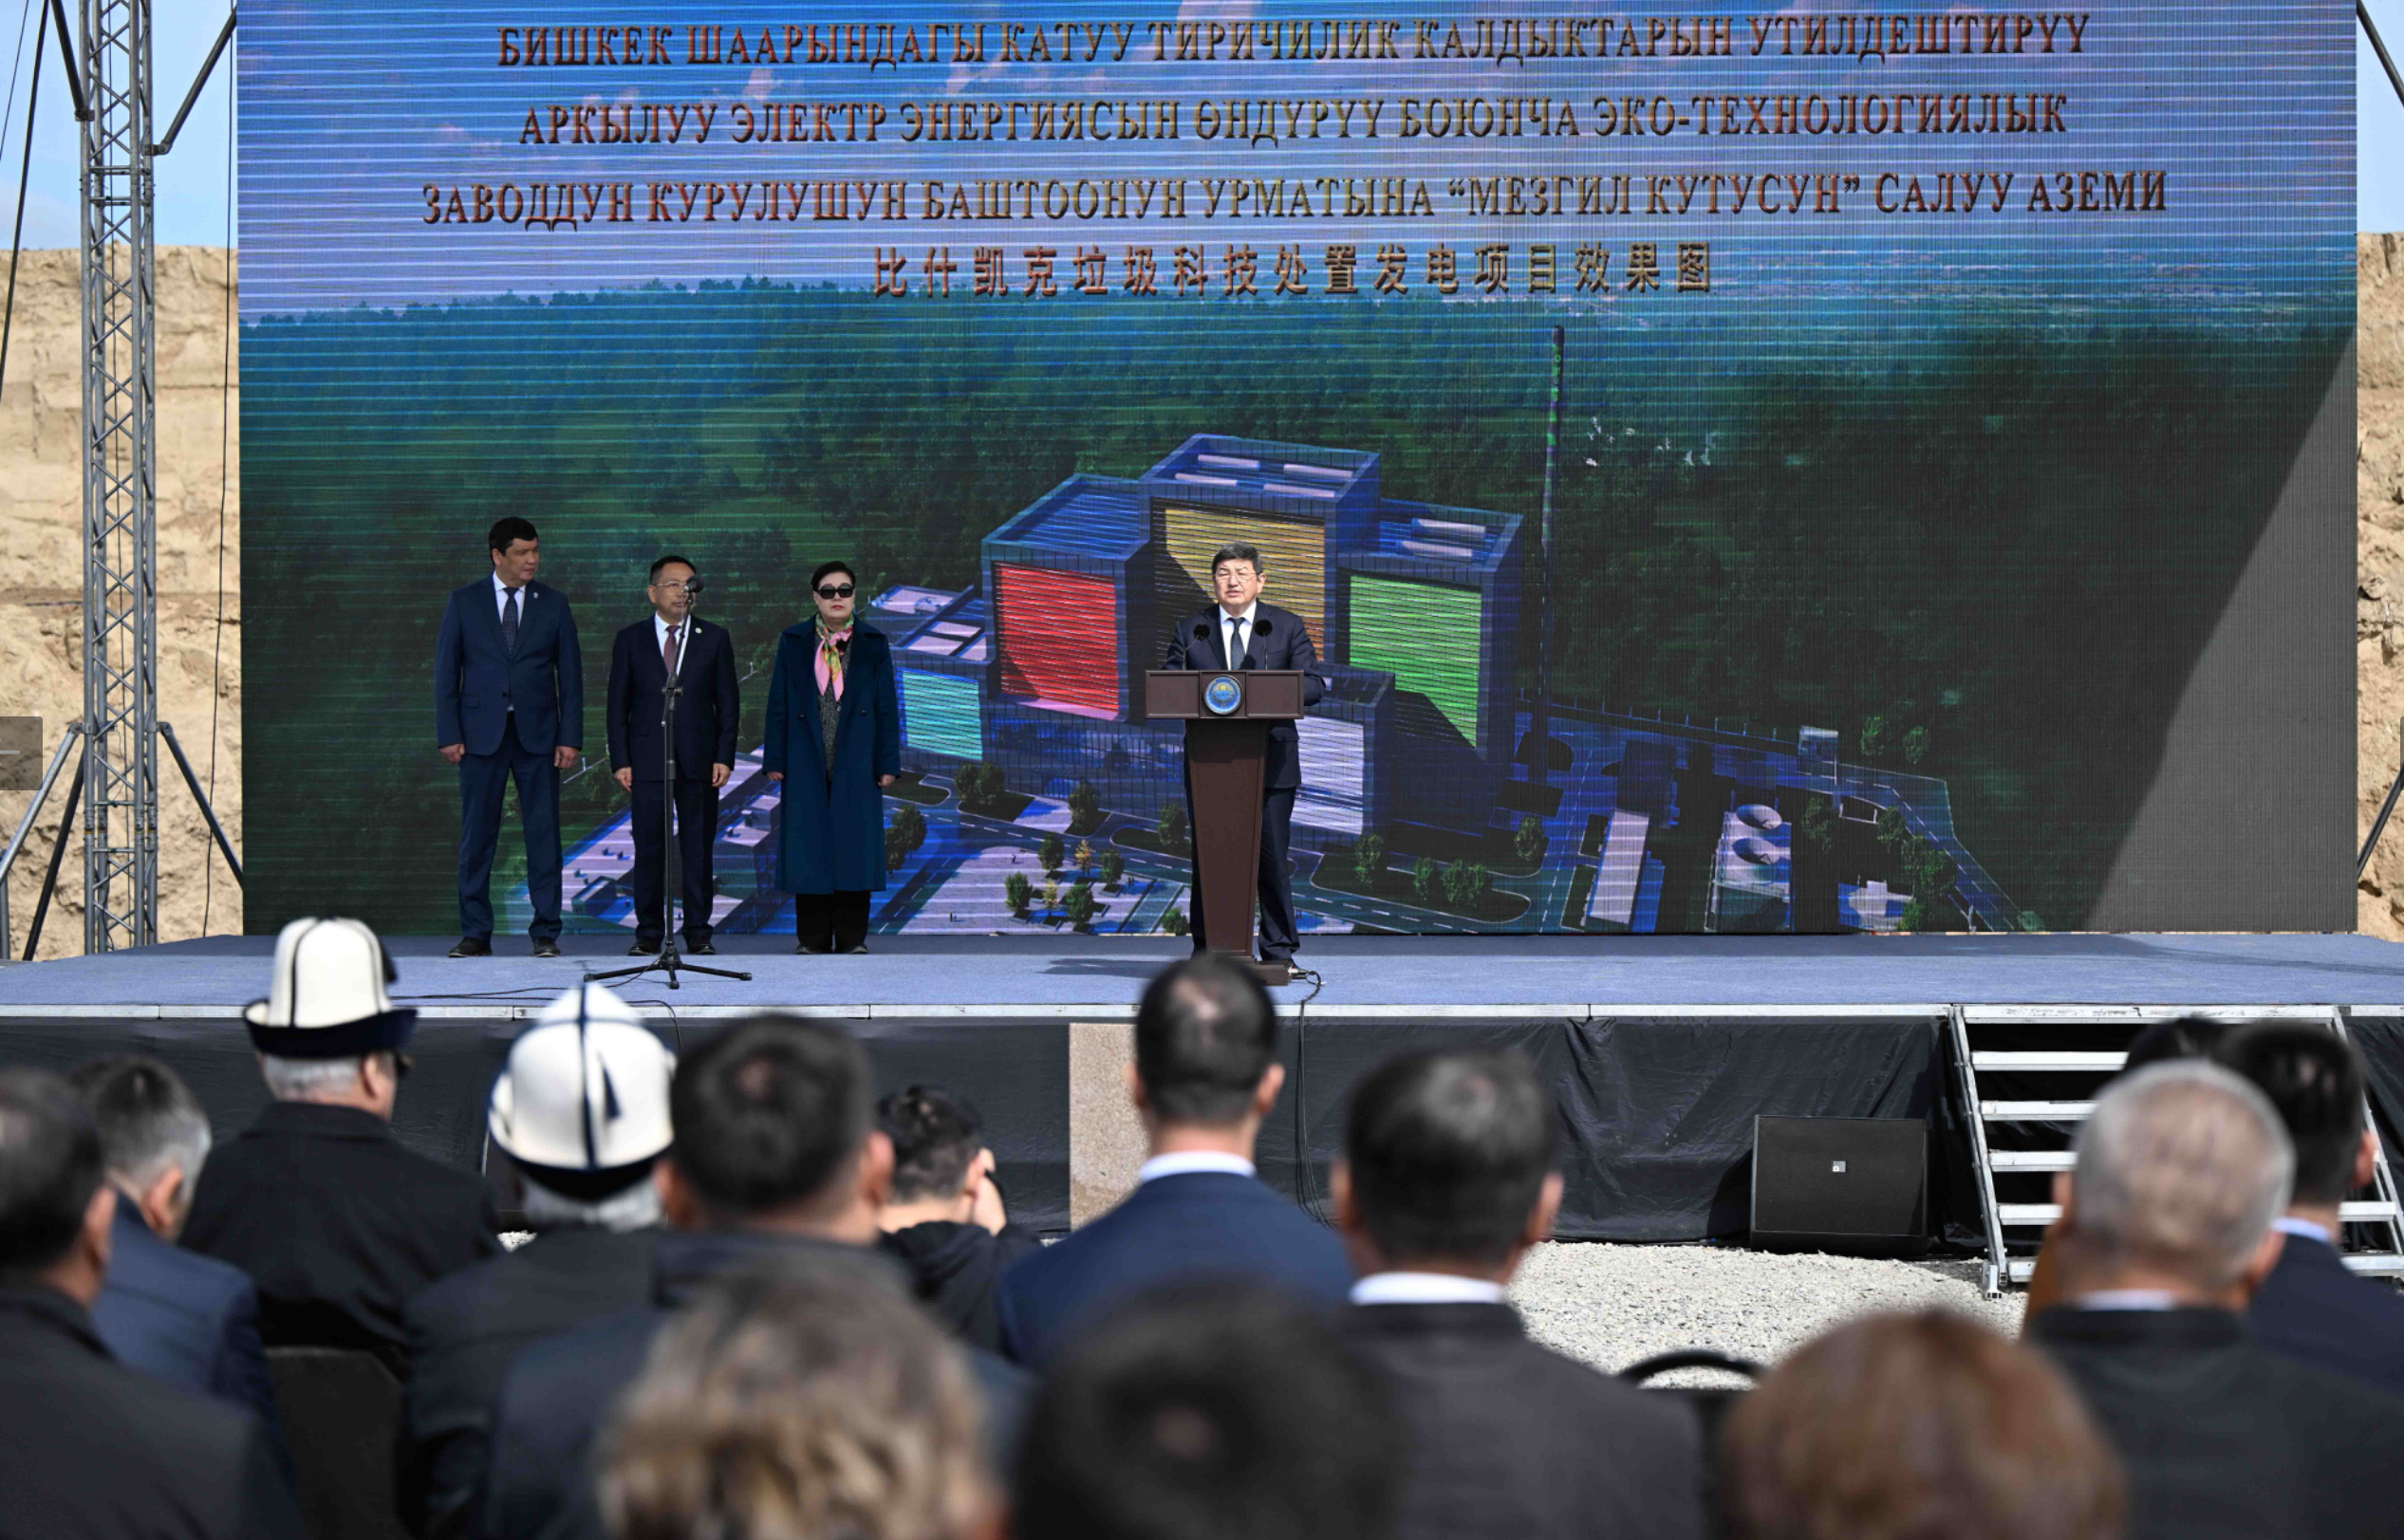 Zhaparov leads ceremony for eco-technological waste plant construction.